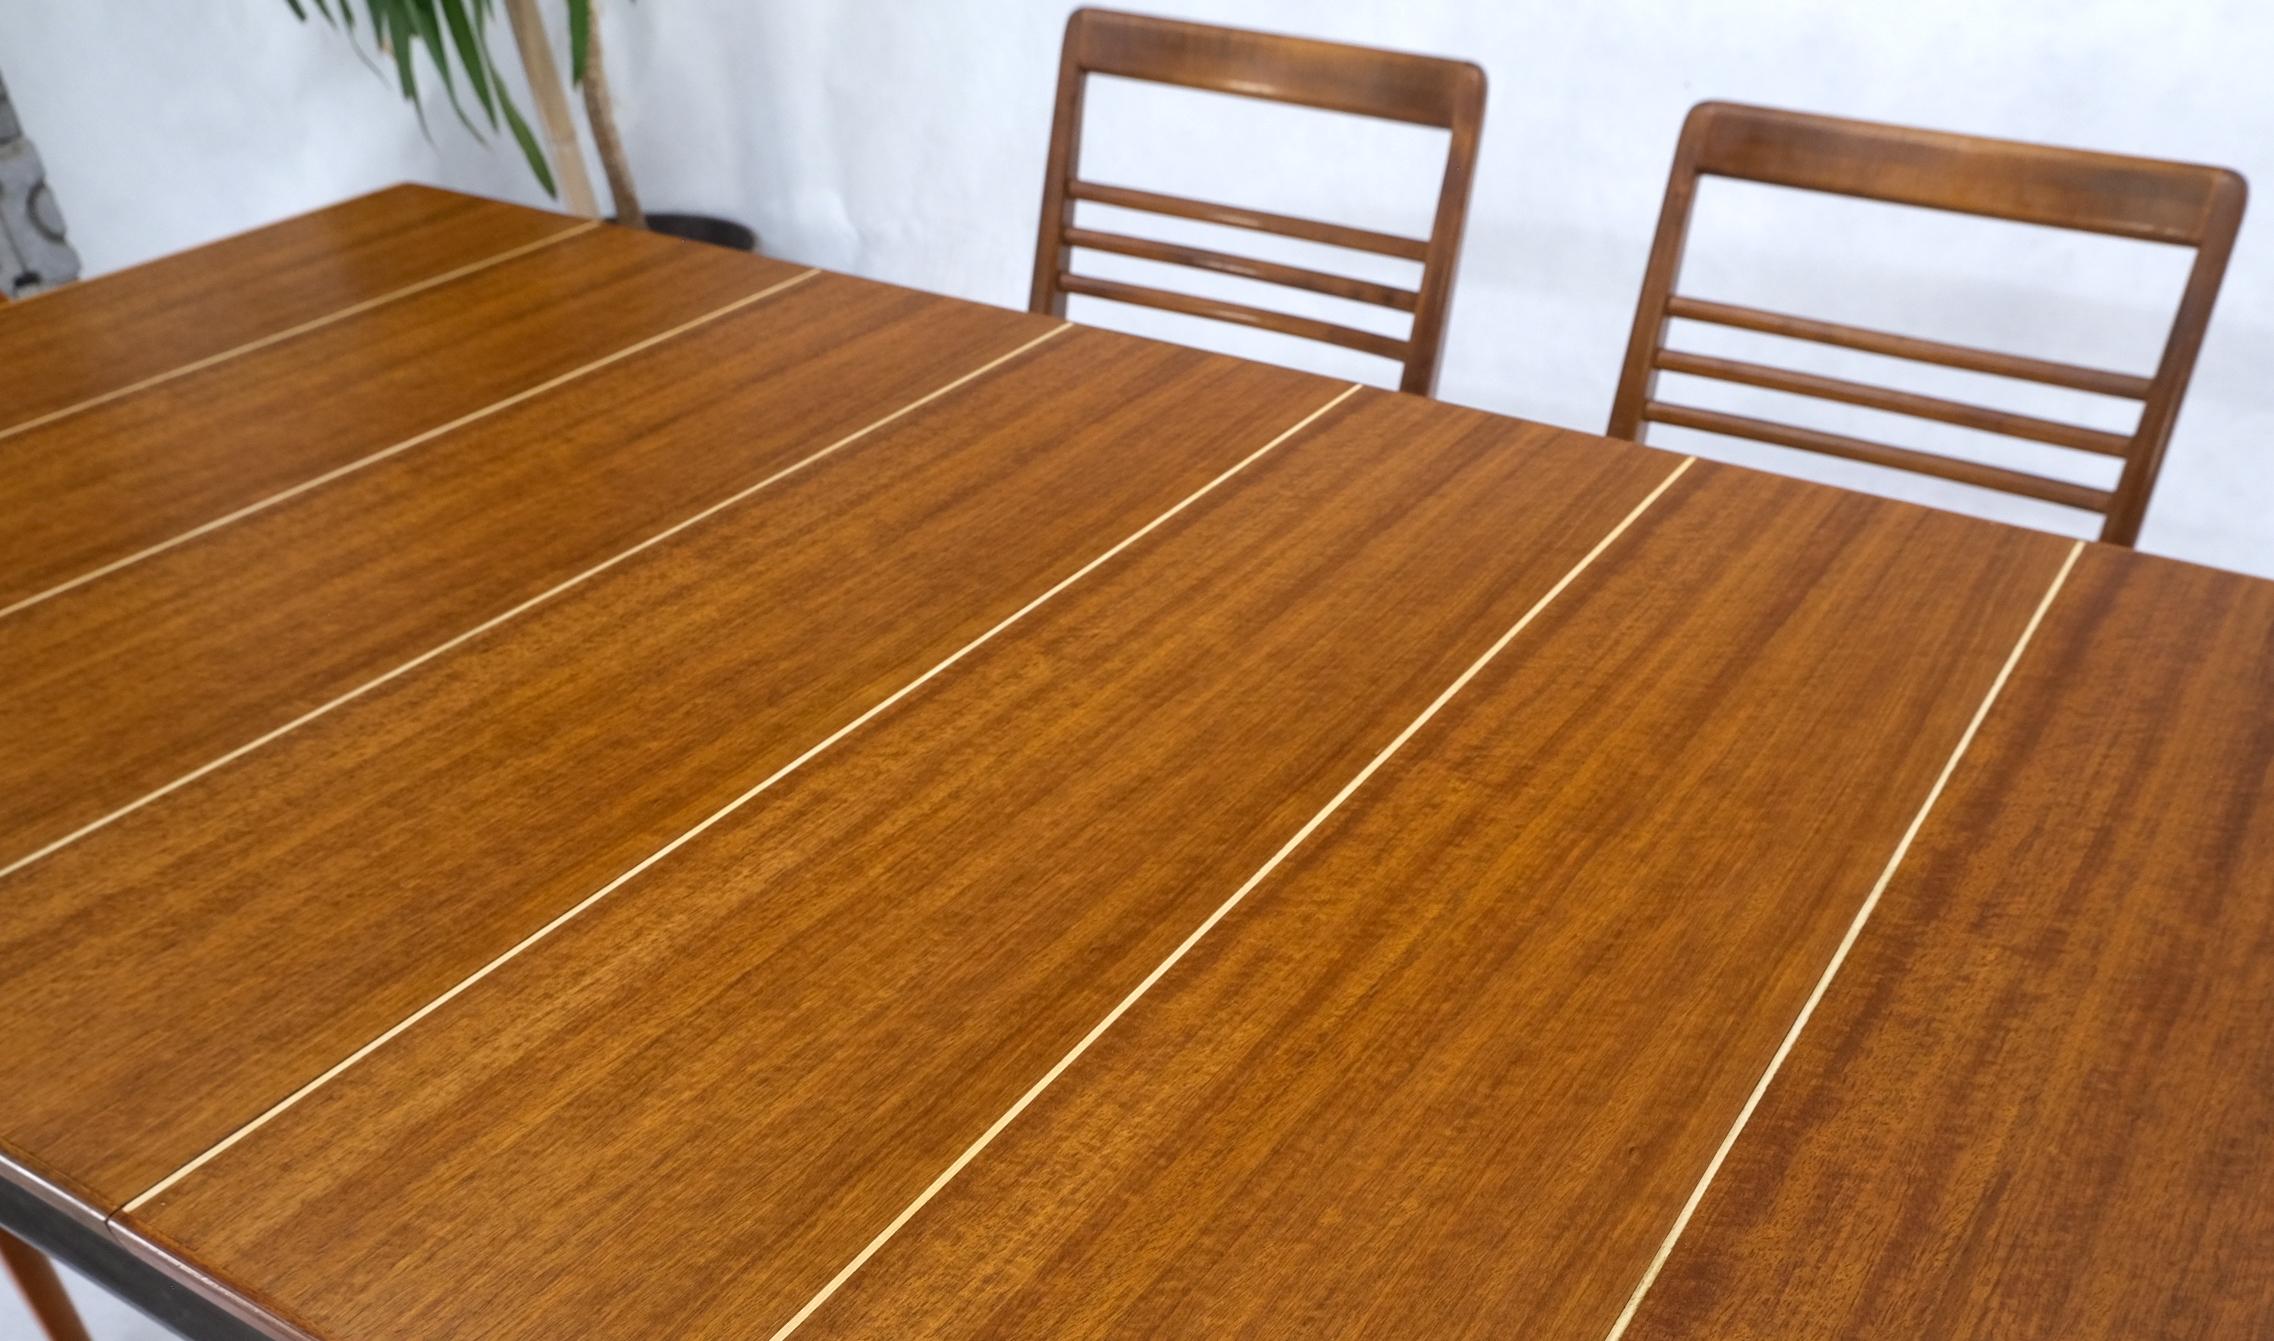 Italian Mid-Century Modern Dining Table 8 Chairs Set New Linen Upholstery Seats For Sale 1